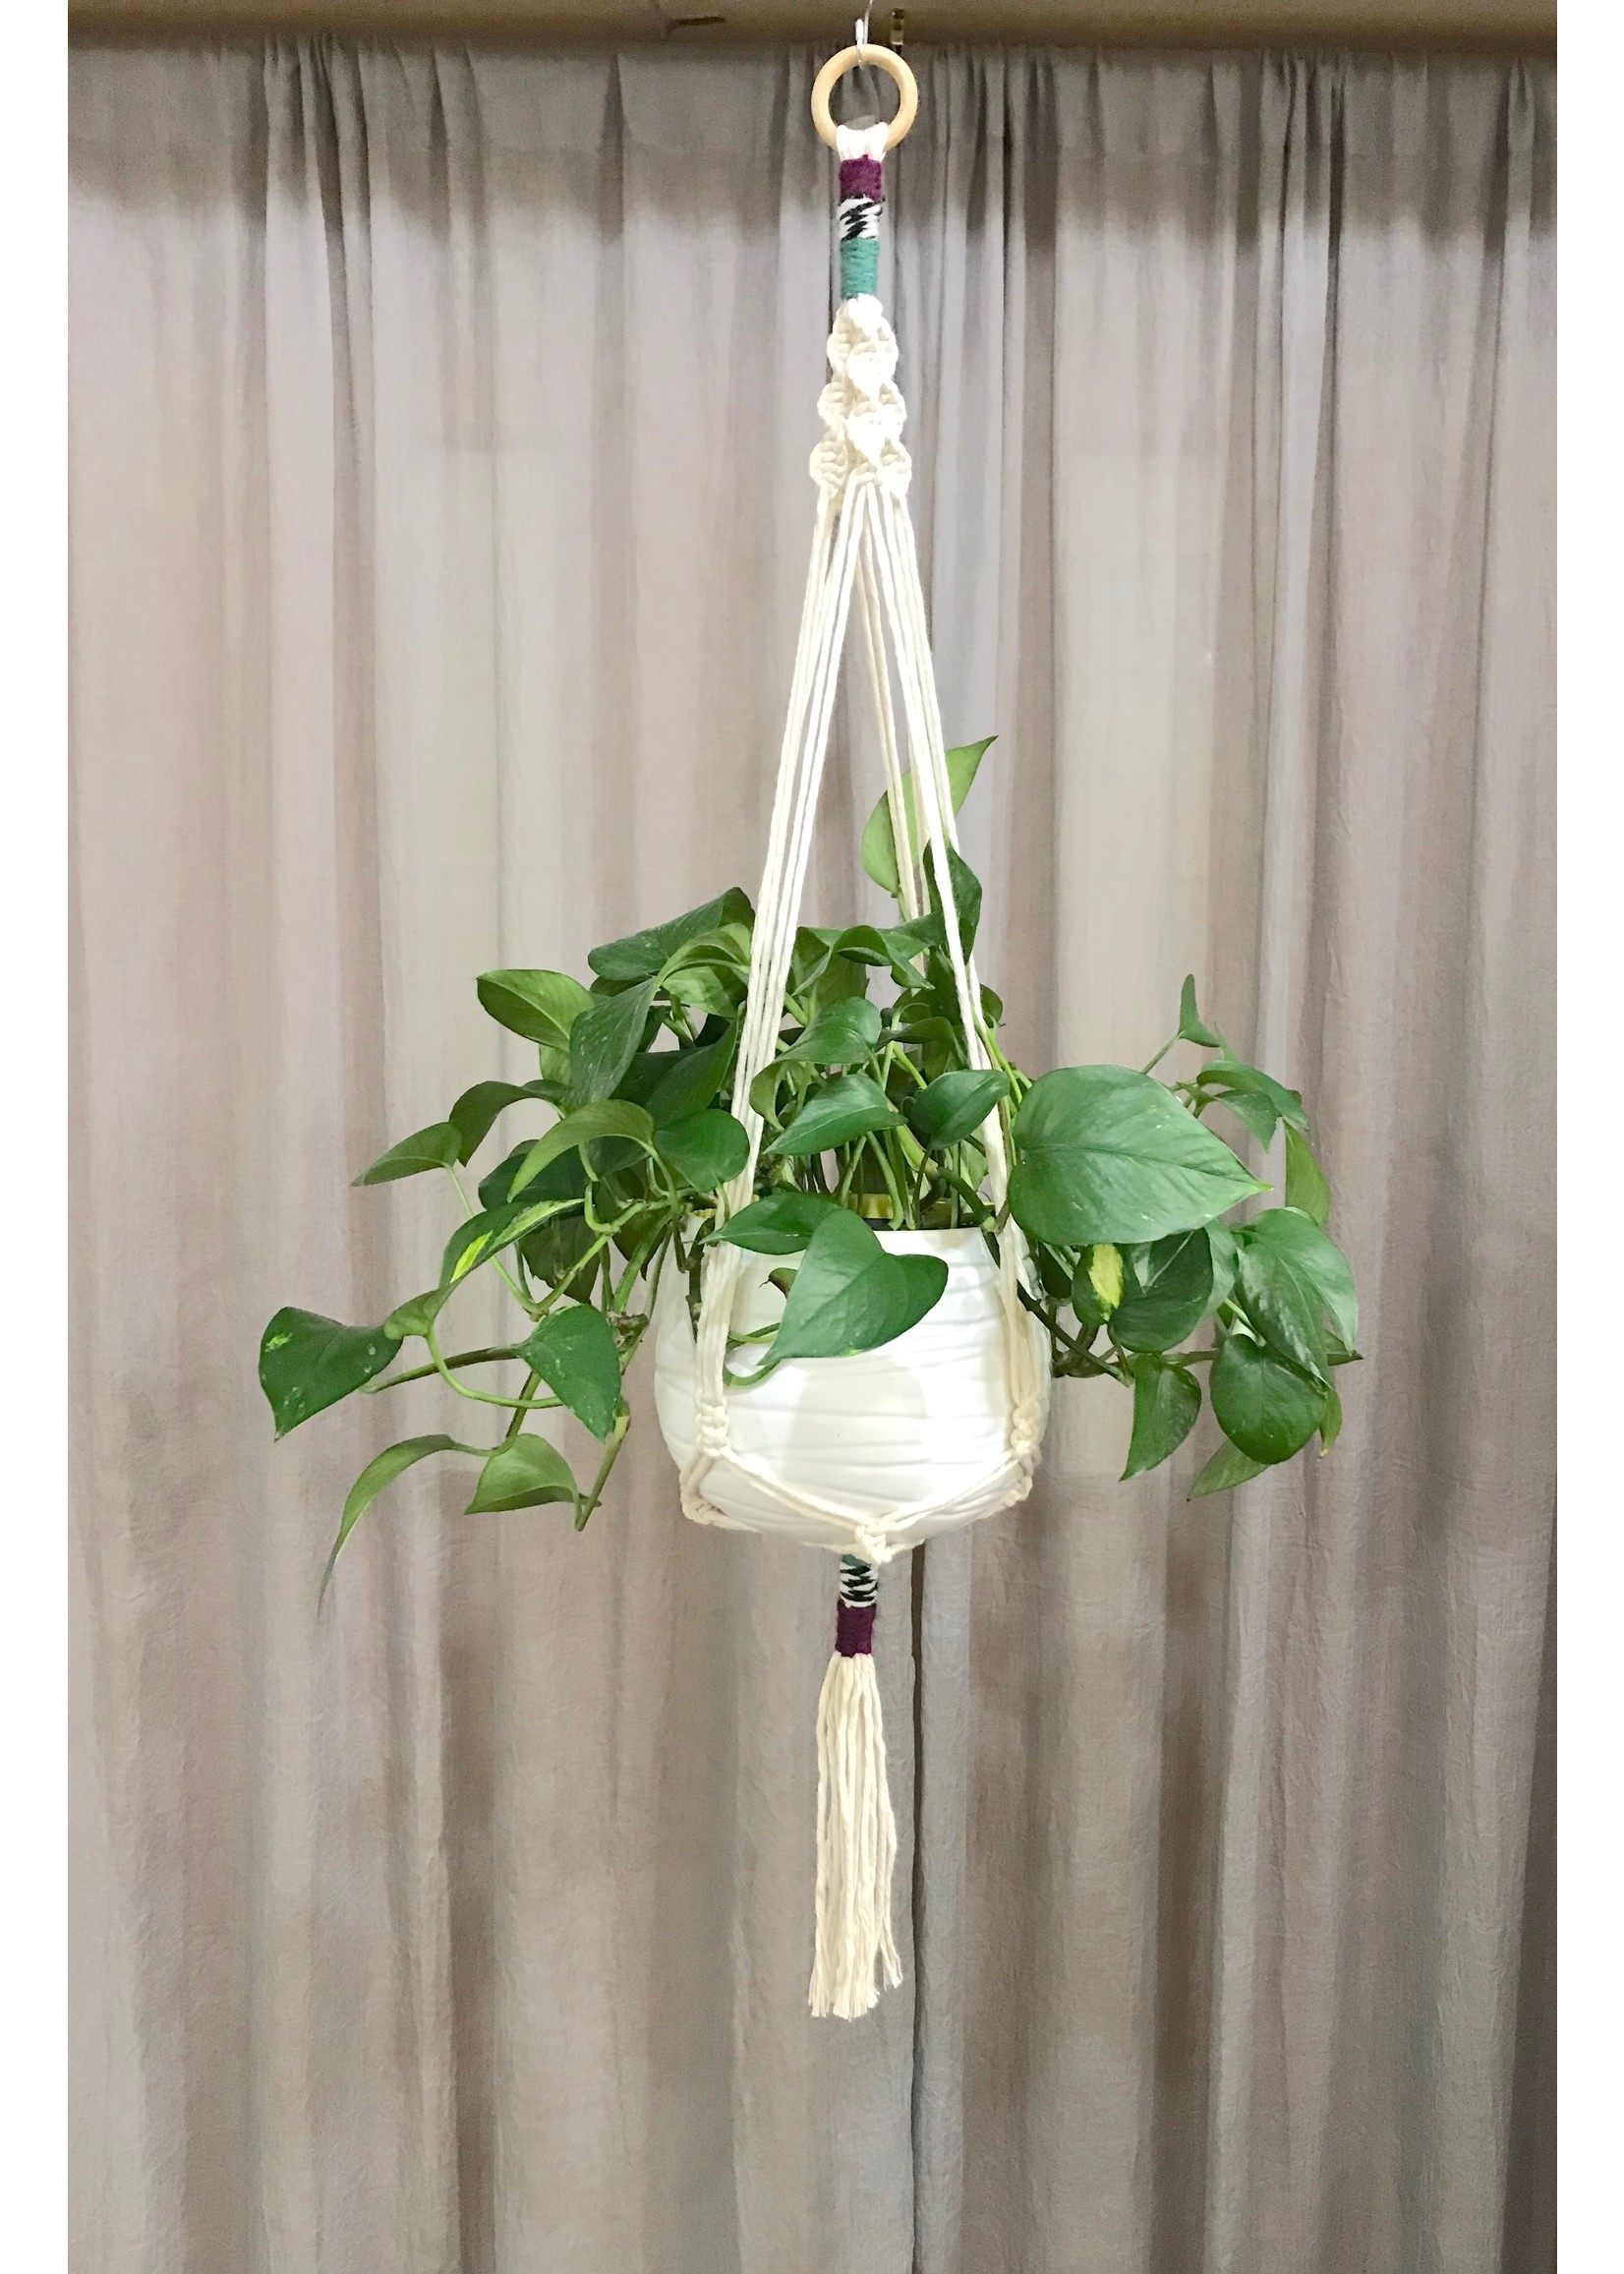 DIY Plant Hangers: Give Your Plants a Home With The Macrame